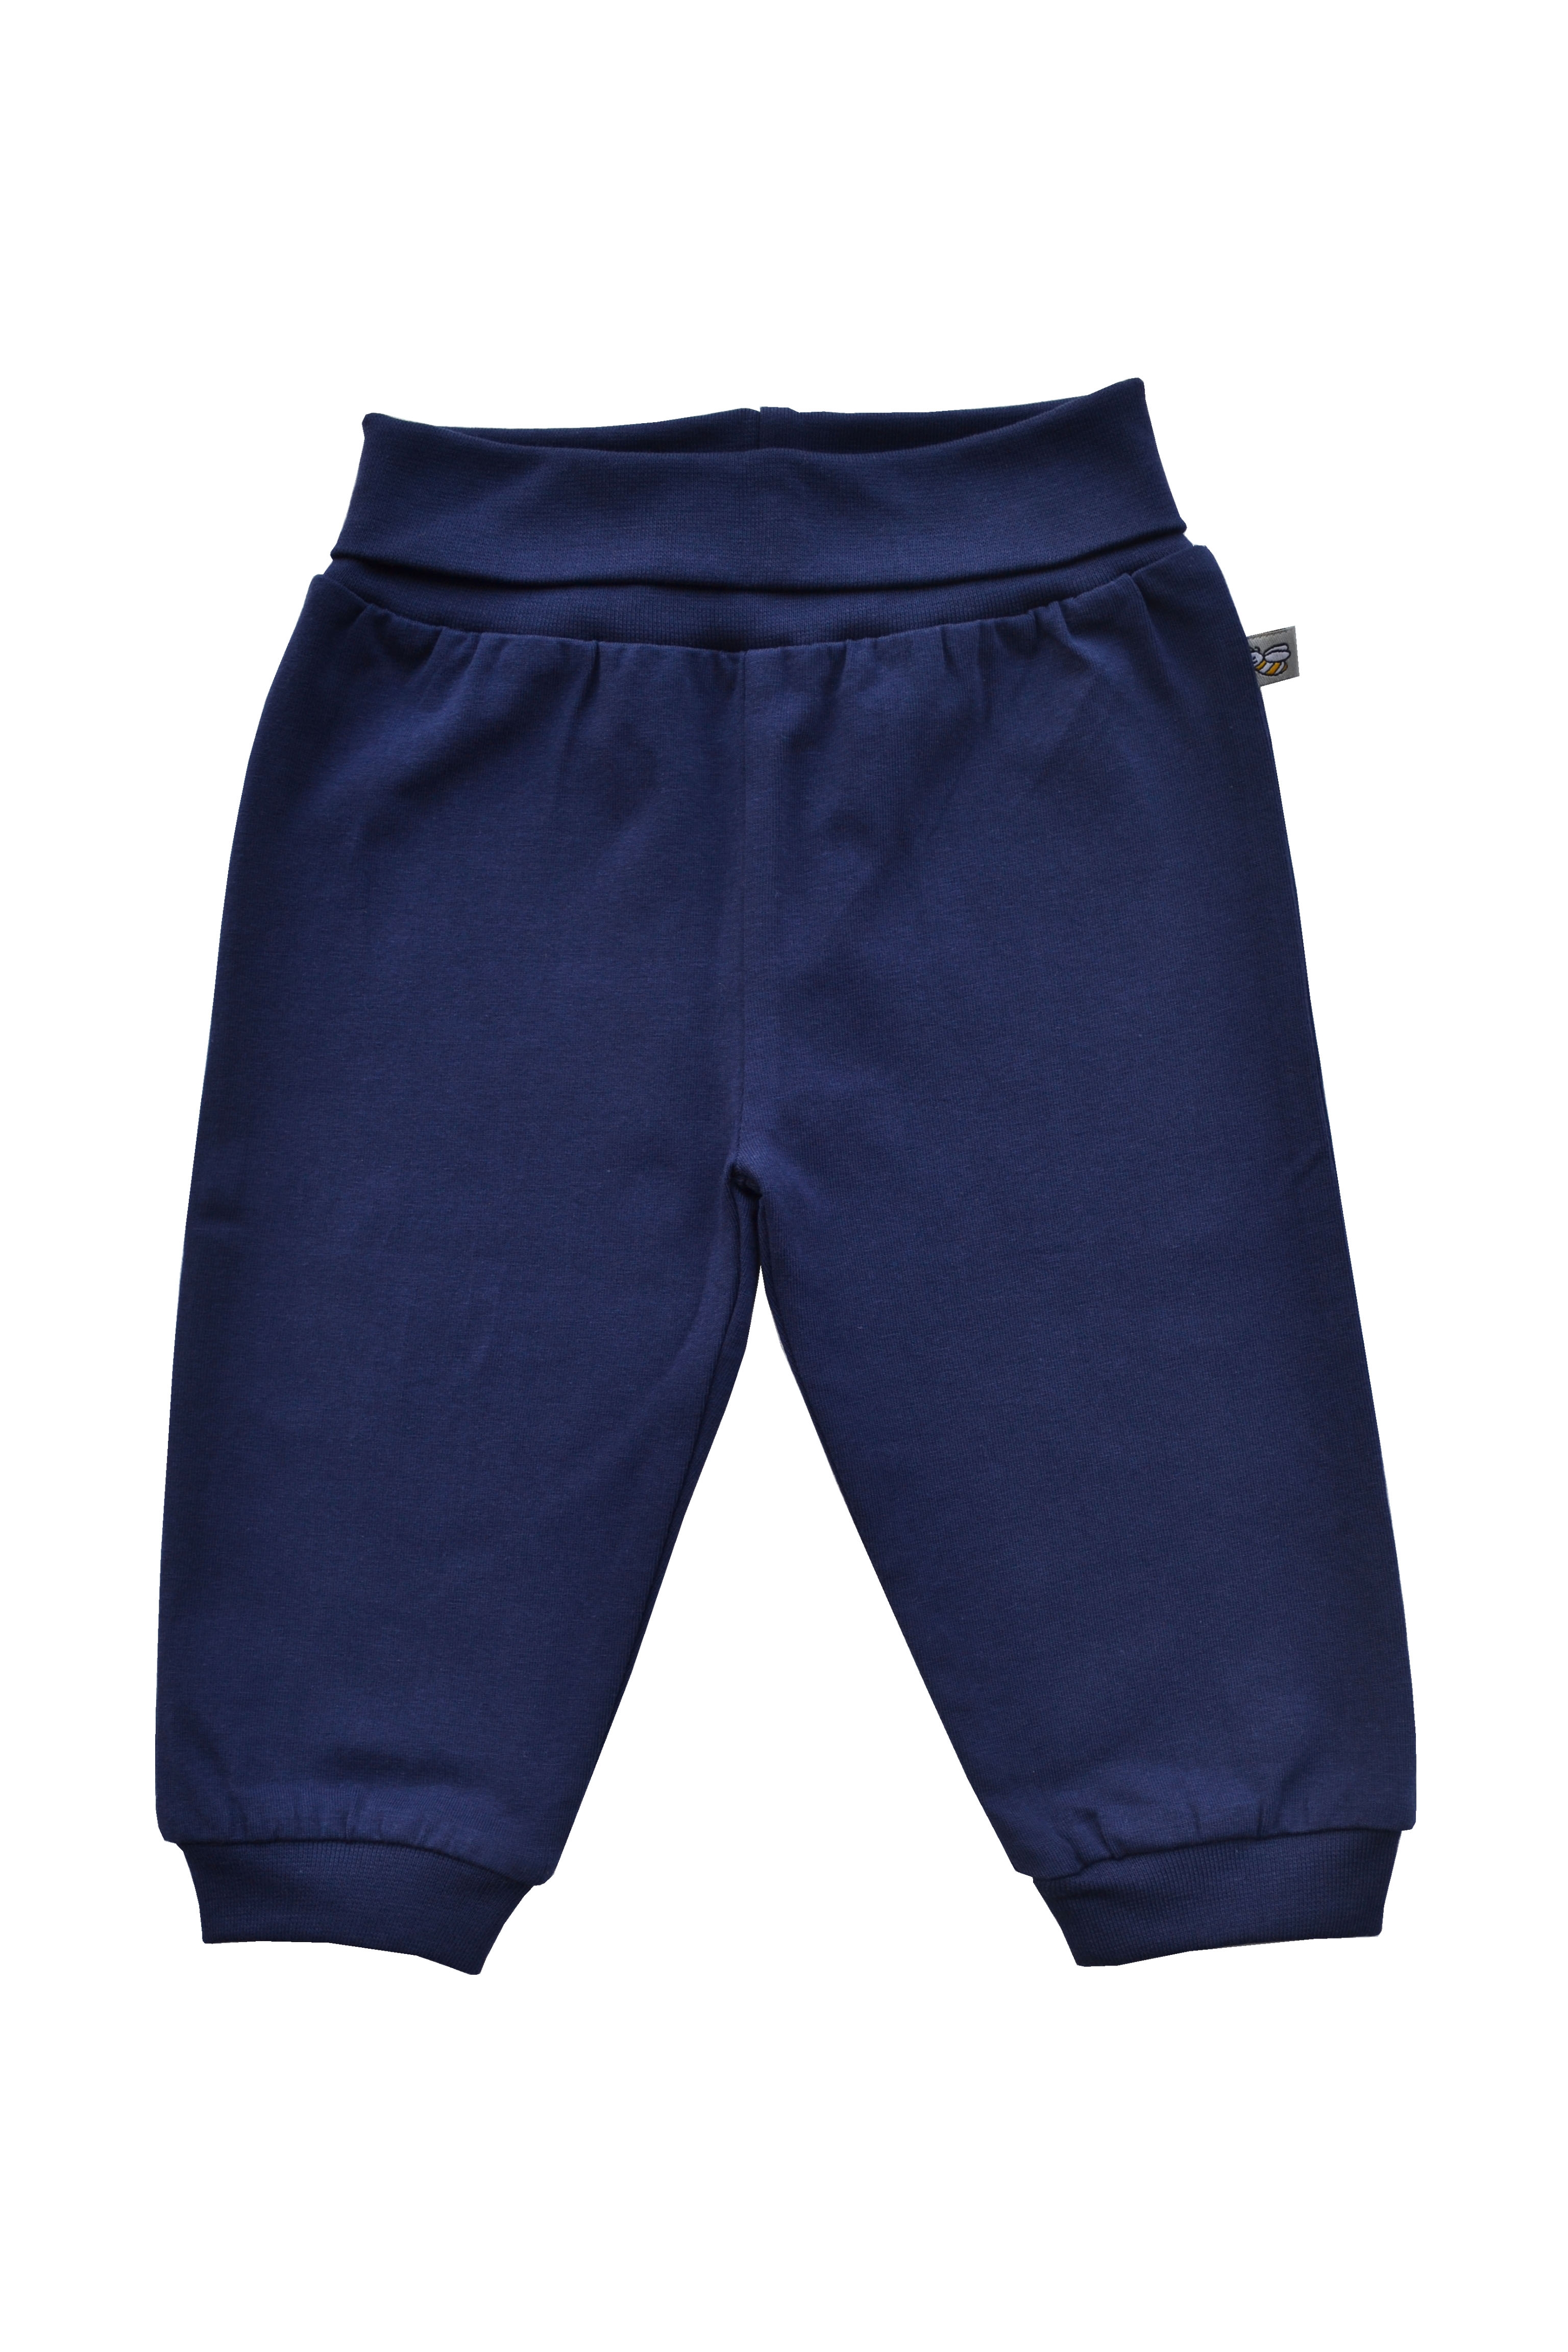 Babeez | Navy Pant (95%Cotton 5%Elasthan Jersey) undefined